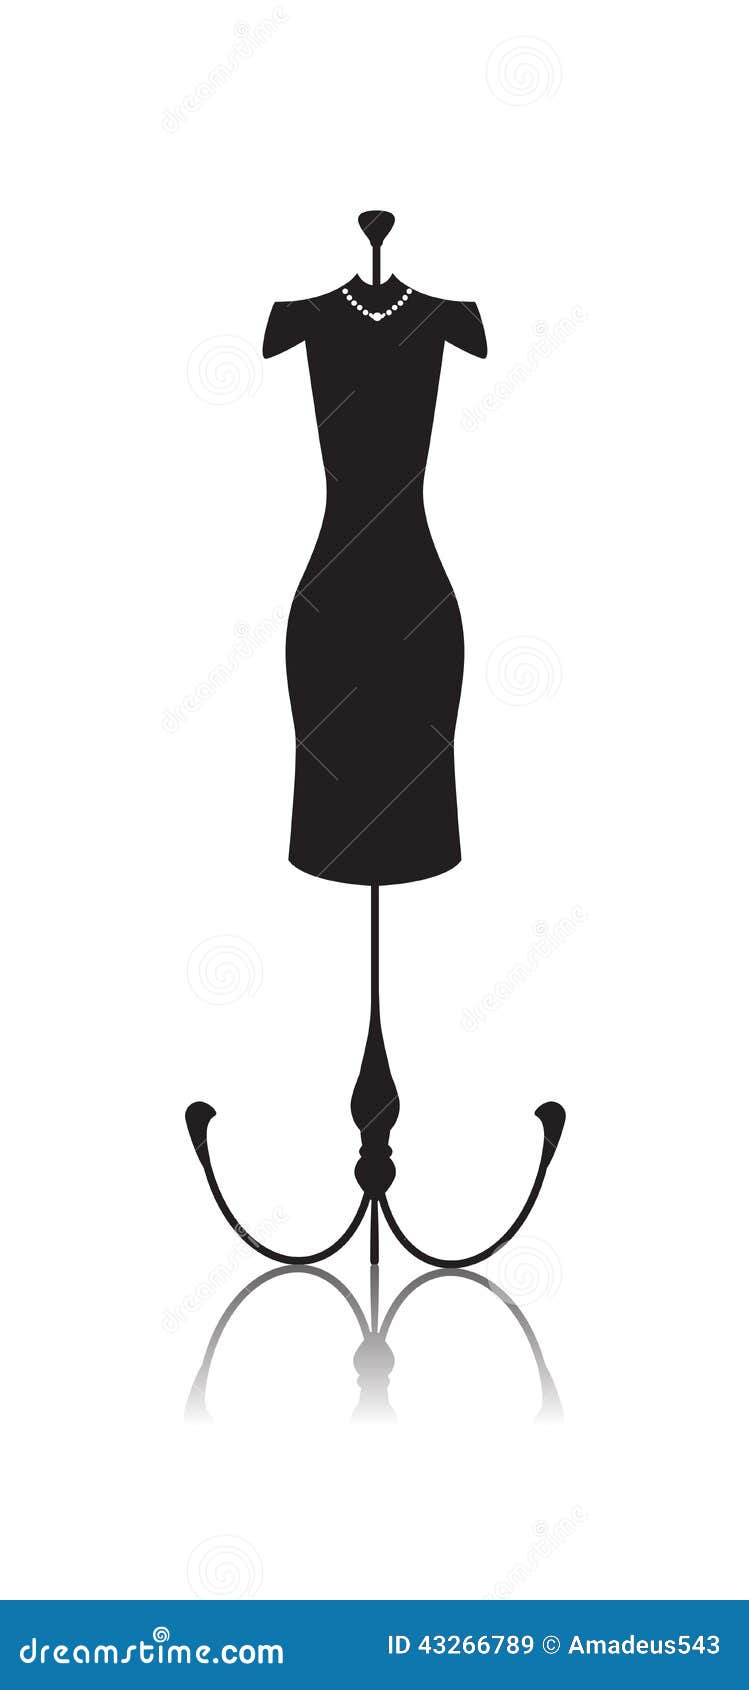 Tailor s mannequin dummy doll vector for your design